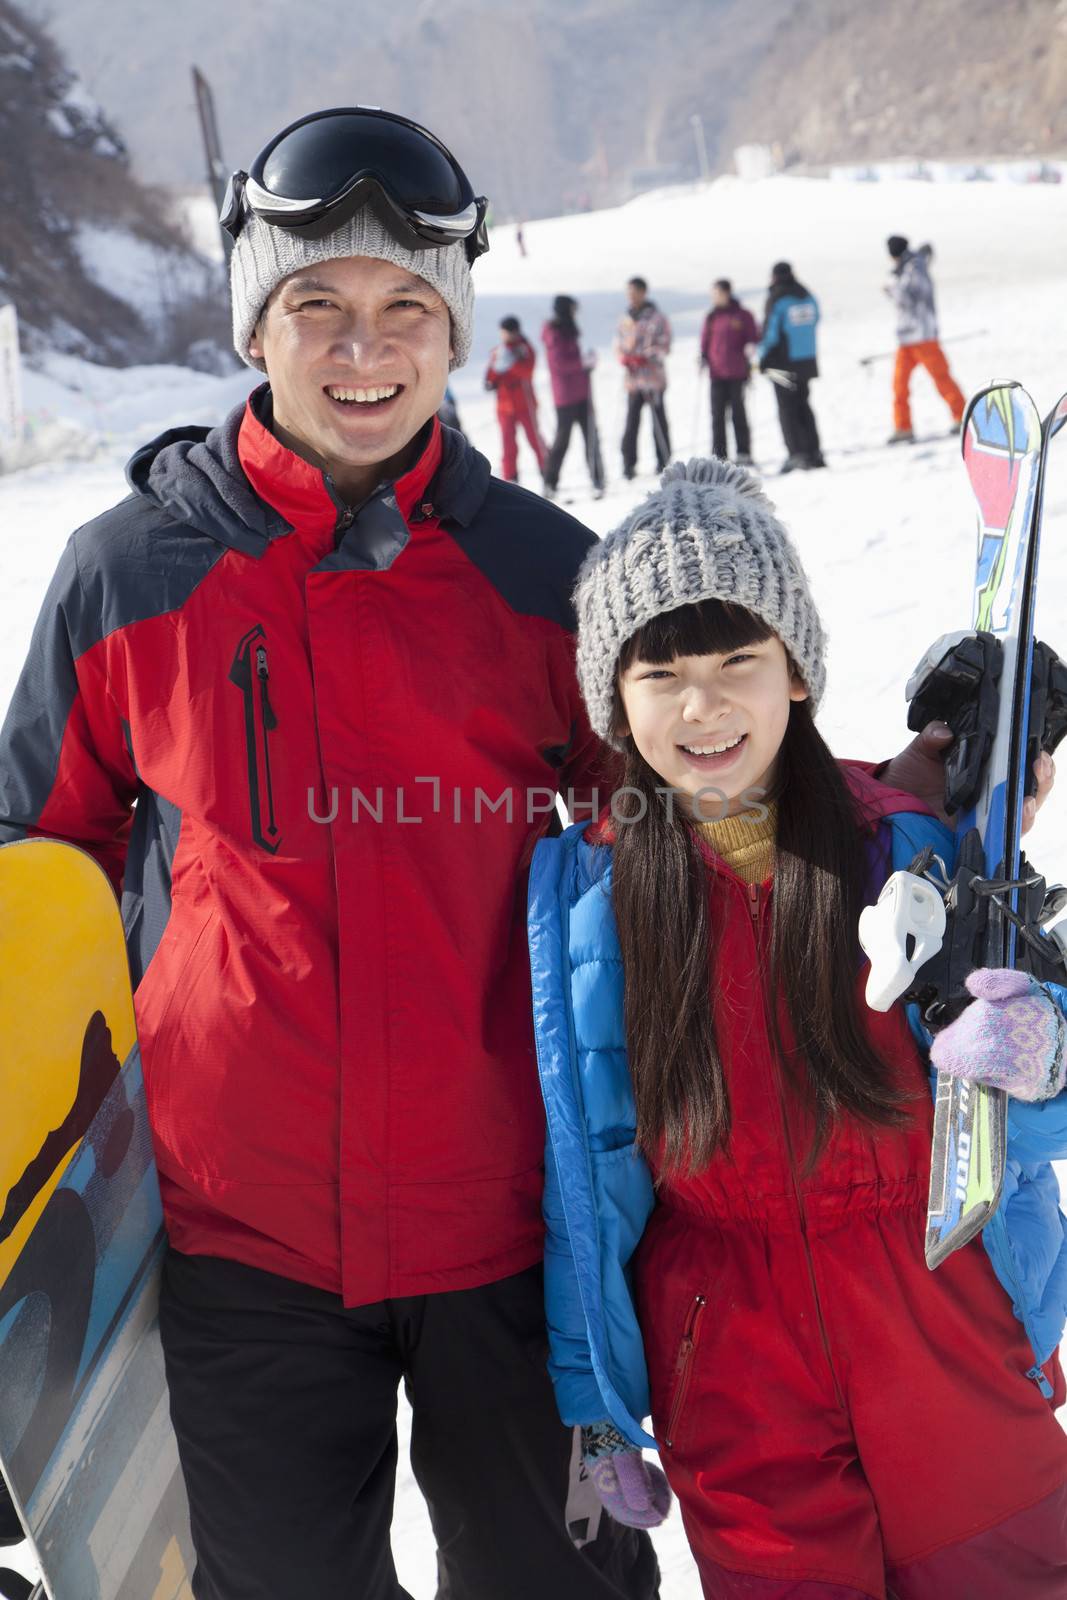 Smiling Father and Daughter in Ski Resort, portrait